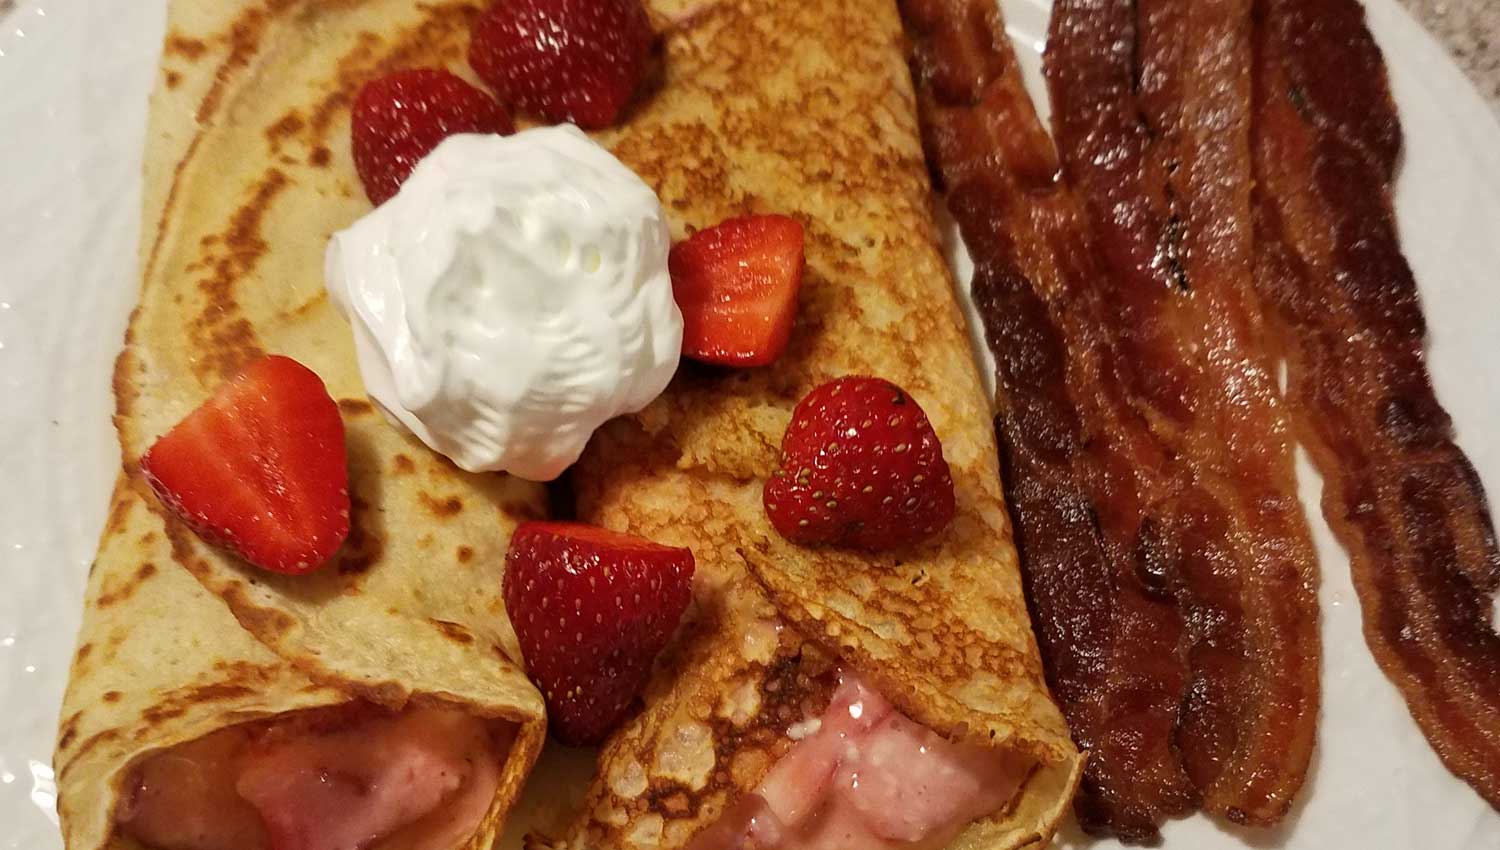 Strawberry Crepes with Bacon